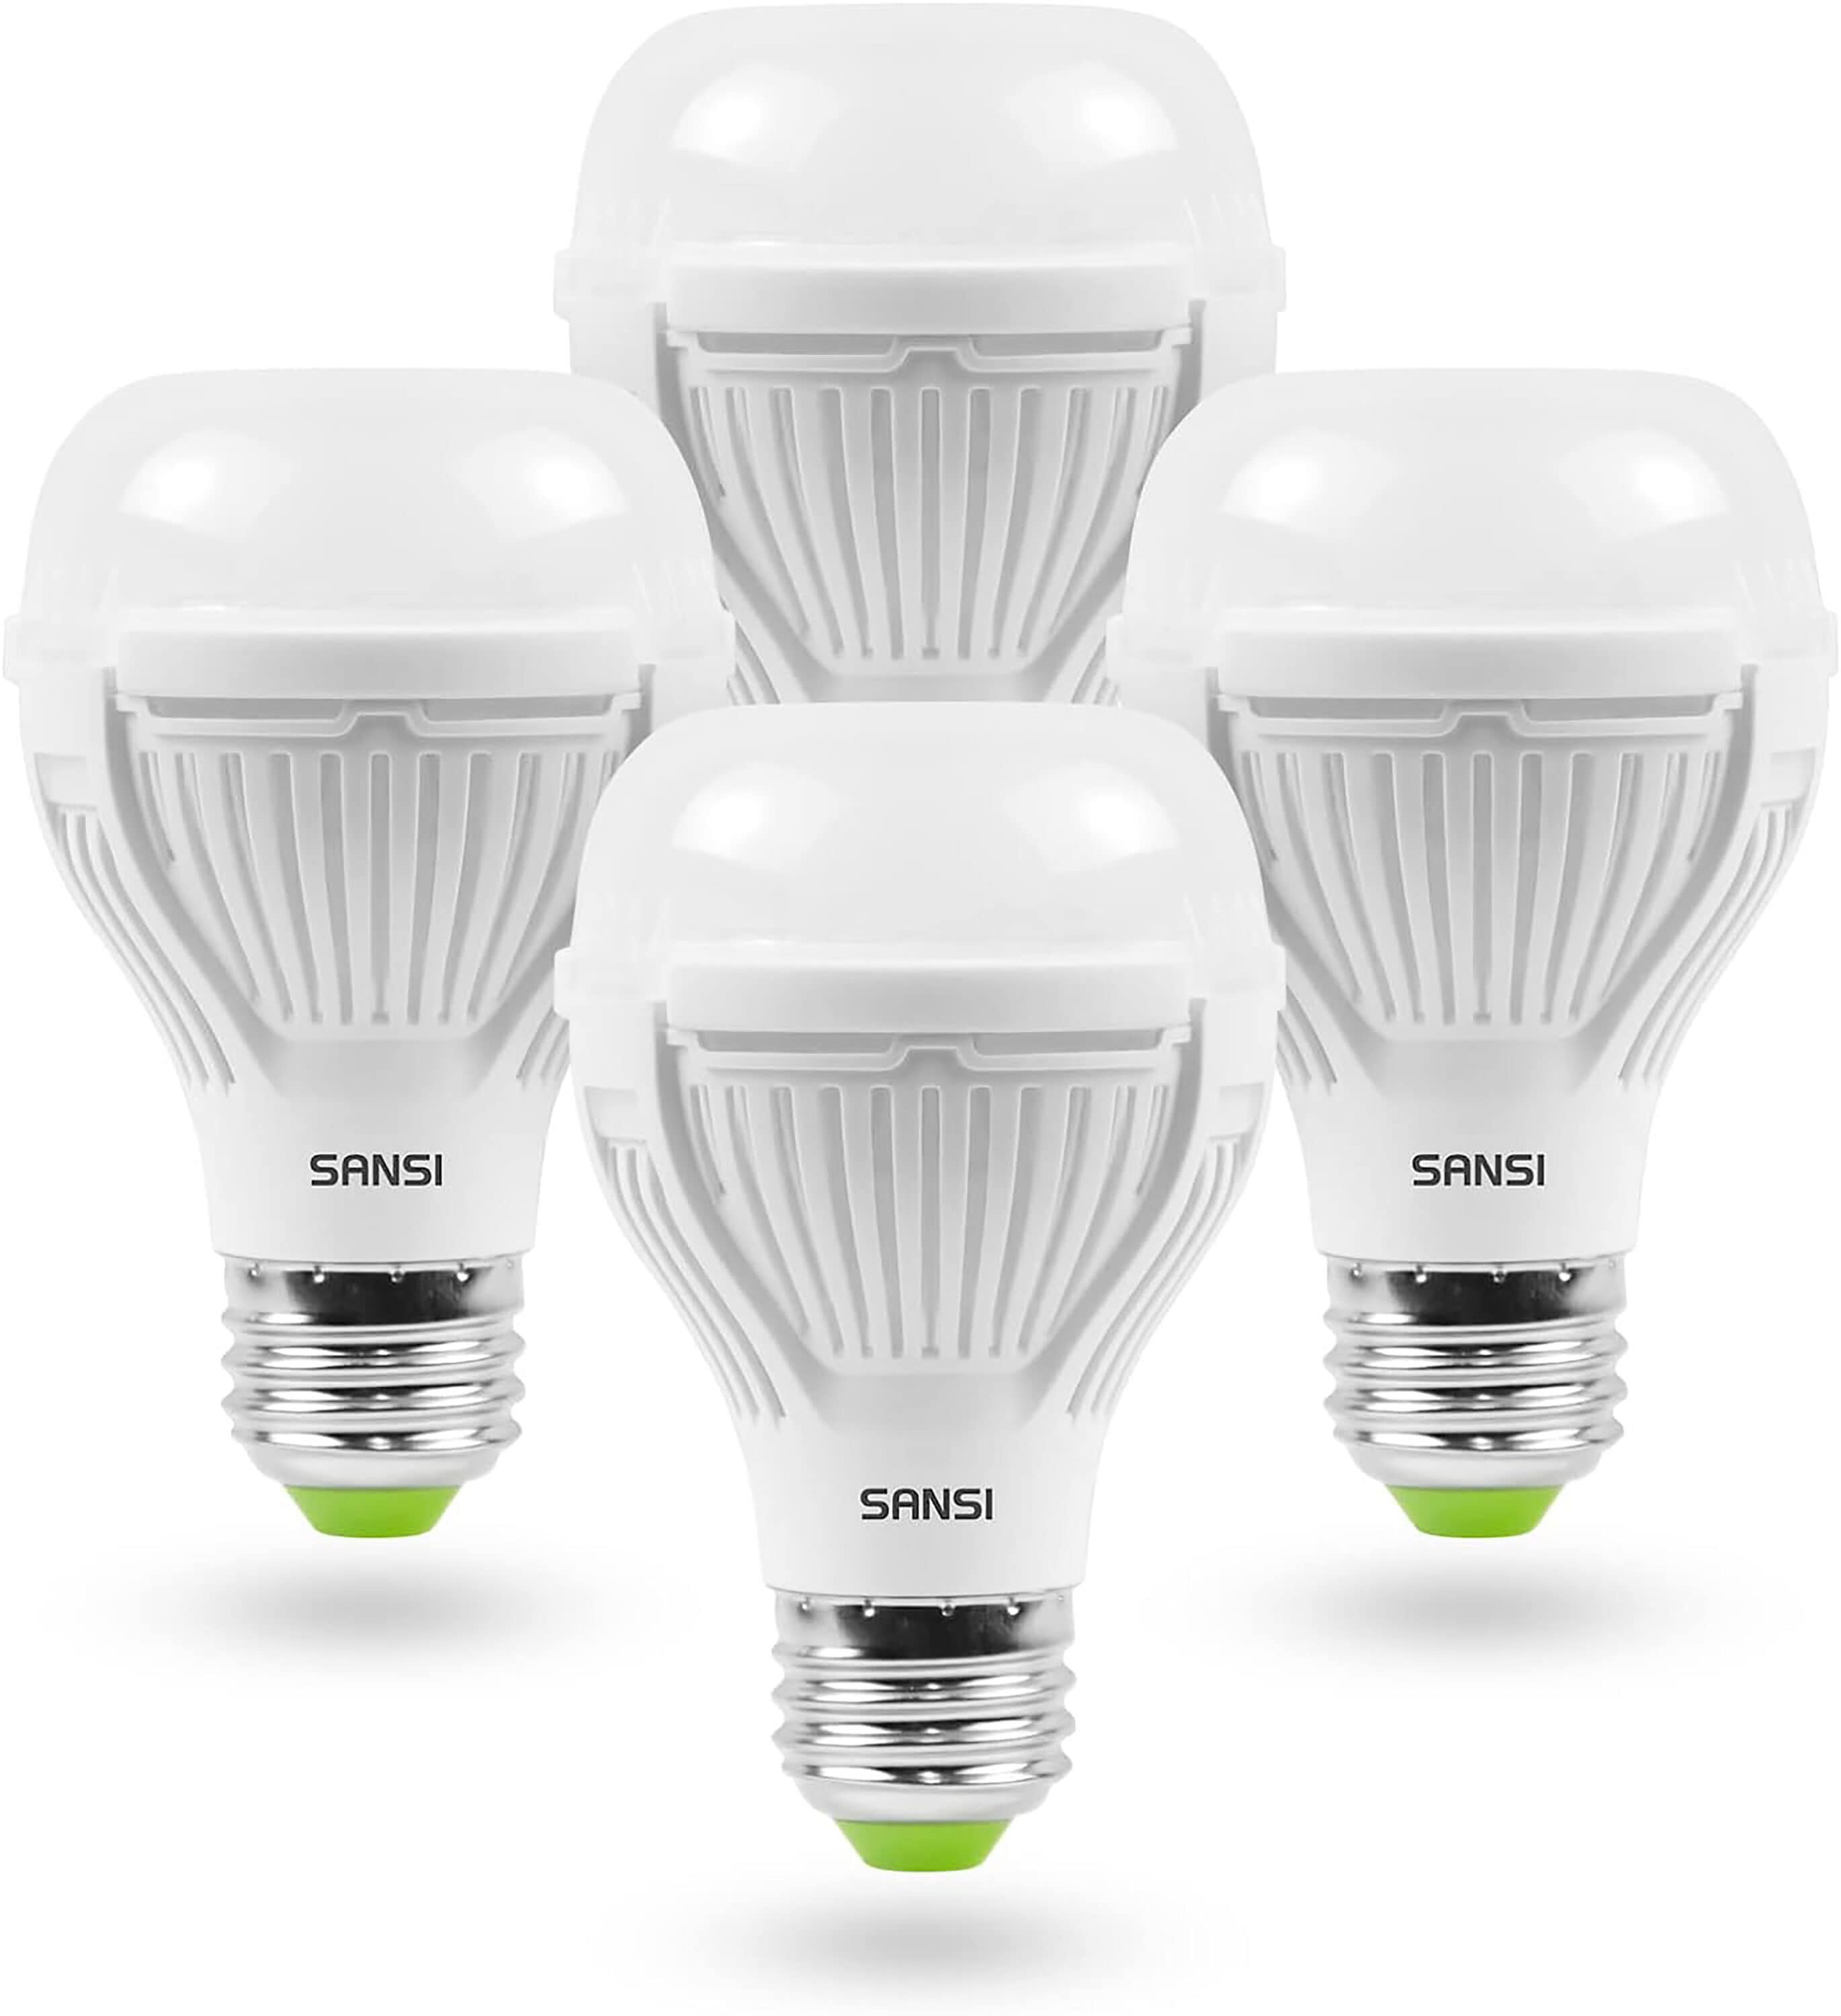 Perpetual brud Nominering SANSI LED light bulbs 100-Watt EQ A19 Daylight E26 LED Light Bulb (4-Pack)  in the General Purpose Light Bulbs department at Lowes.com